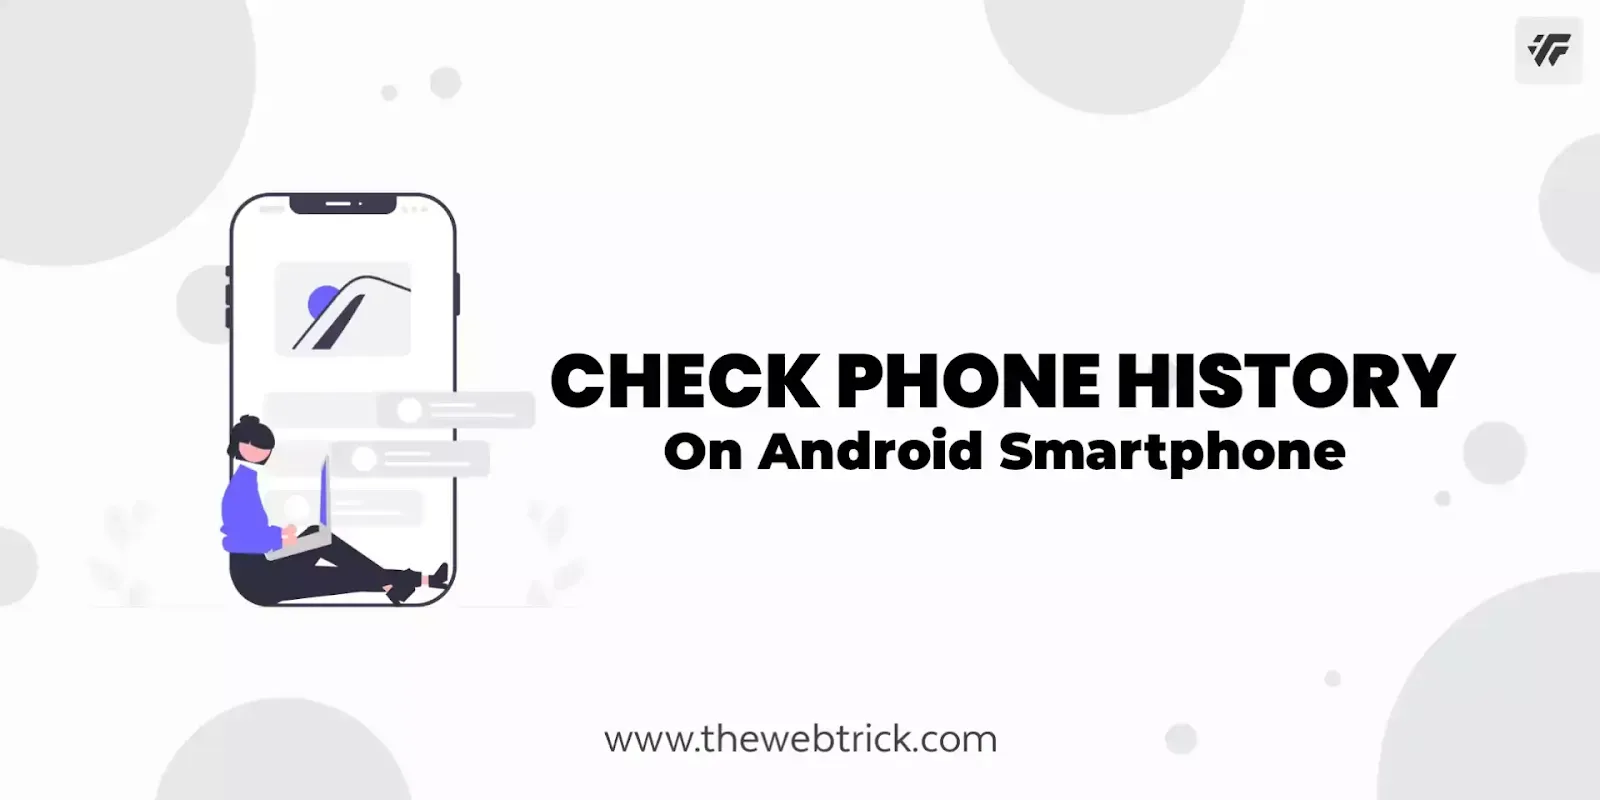 Check Phone History On Android Smartphone?